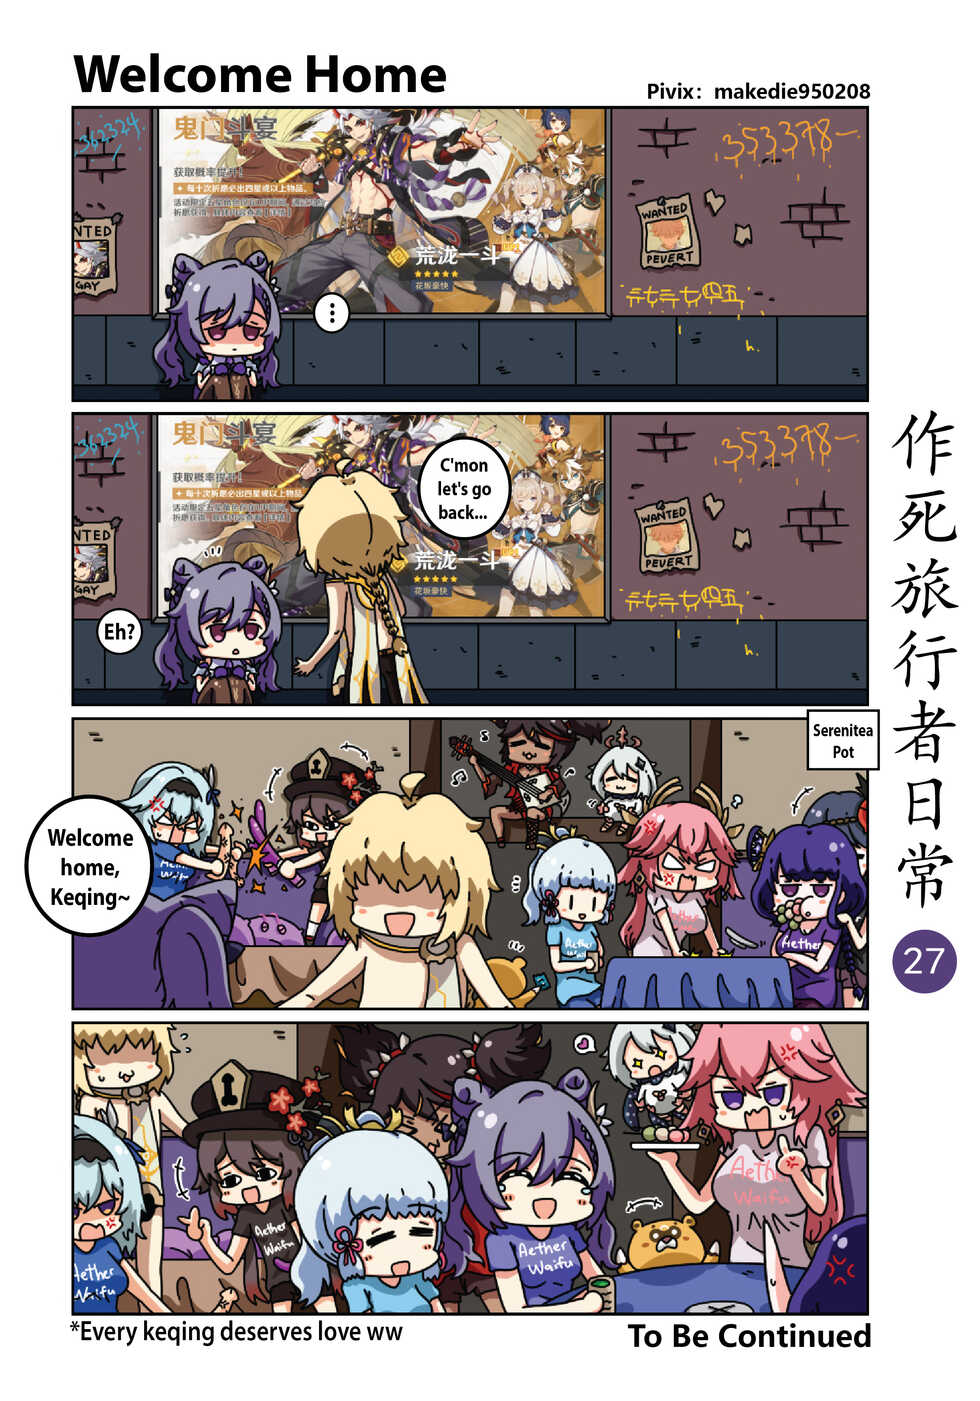 [makedie950208] Dead Traveler Daily [english] - Page 27